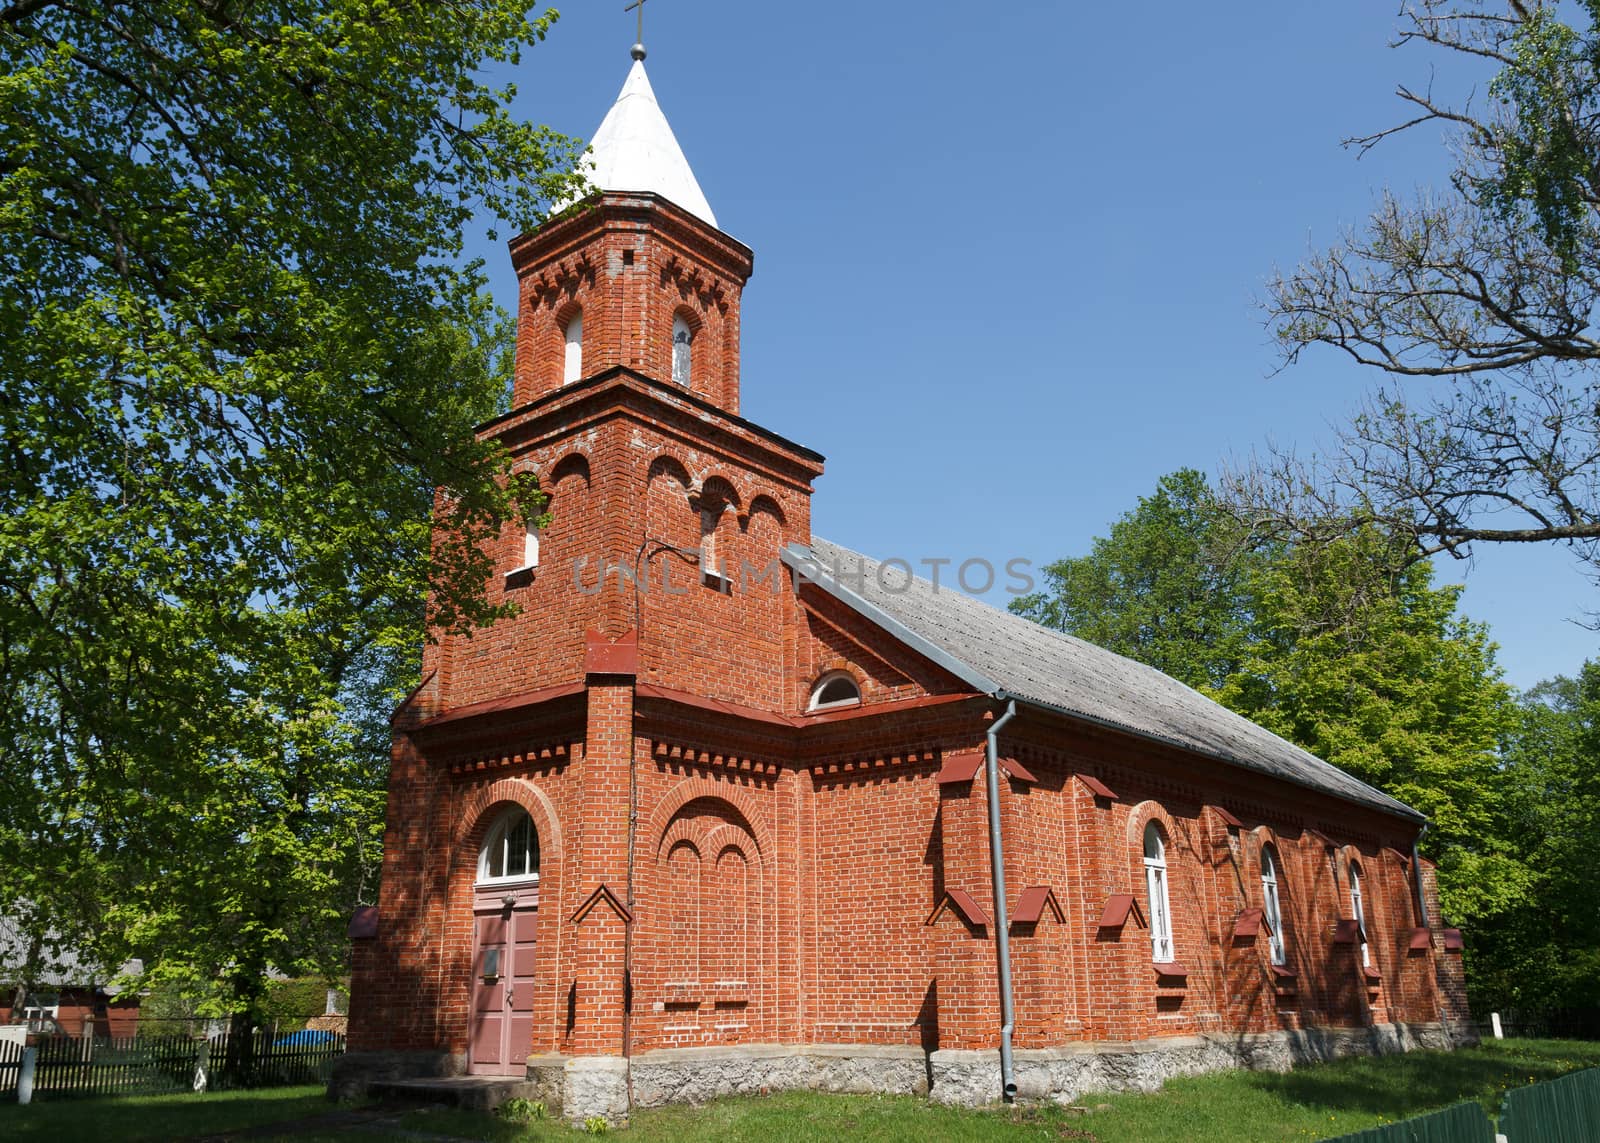 Latvia, Mikeltornis Evangelical Lutheran Church was build in 1893